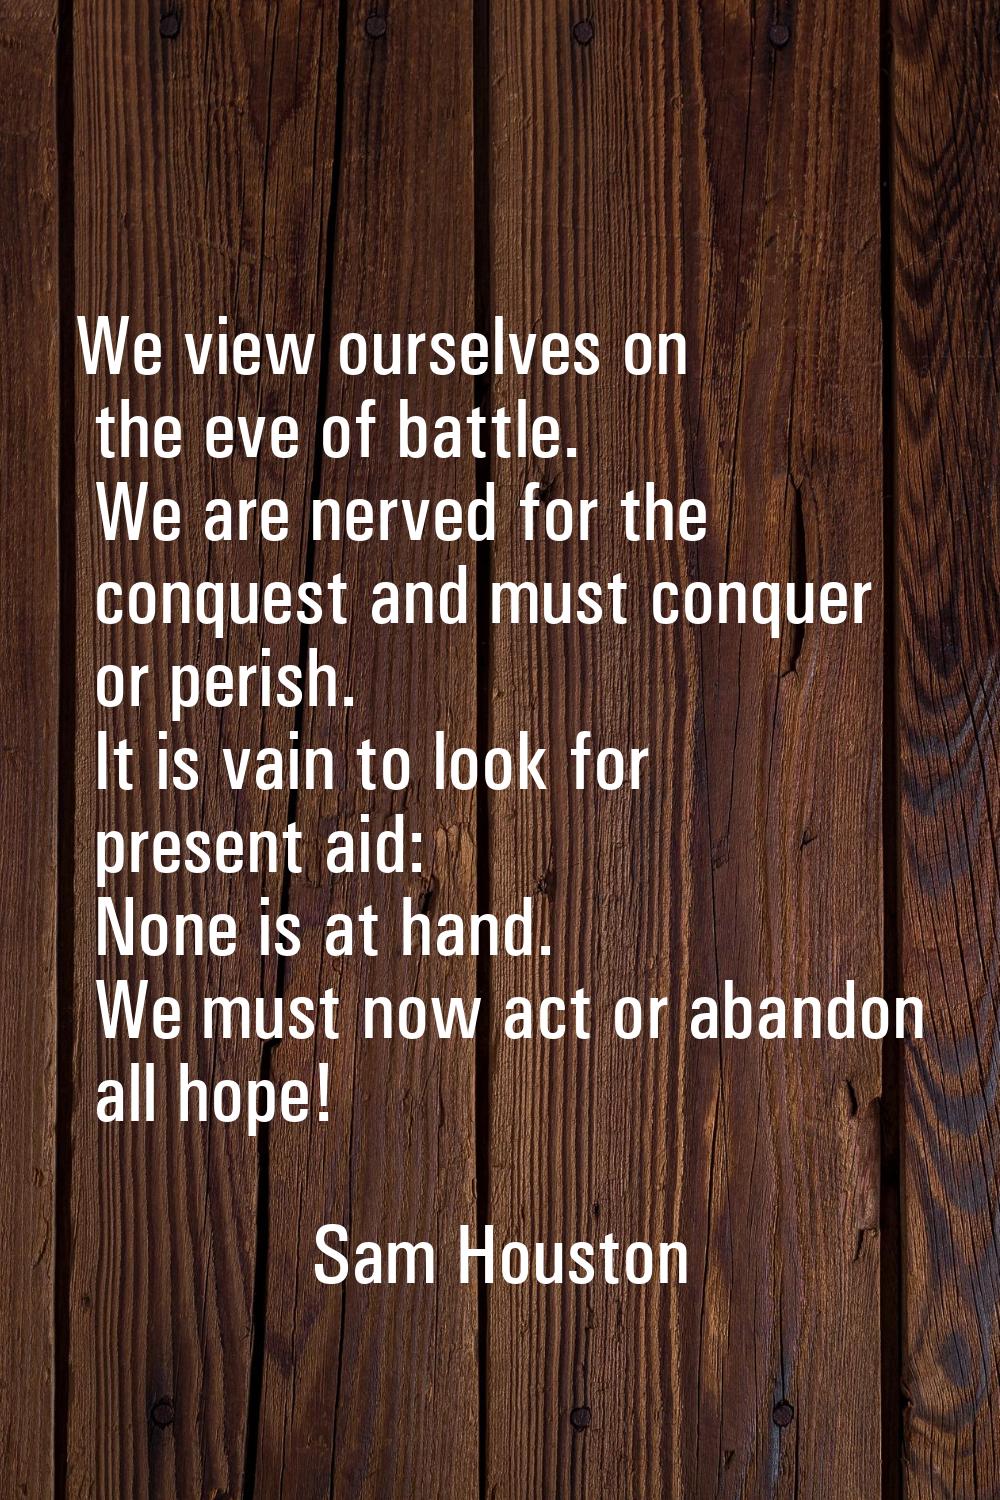 We view ourselves on the eve of battle. We are nerved for the conquest and must conquer or perish. 